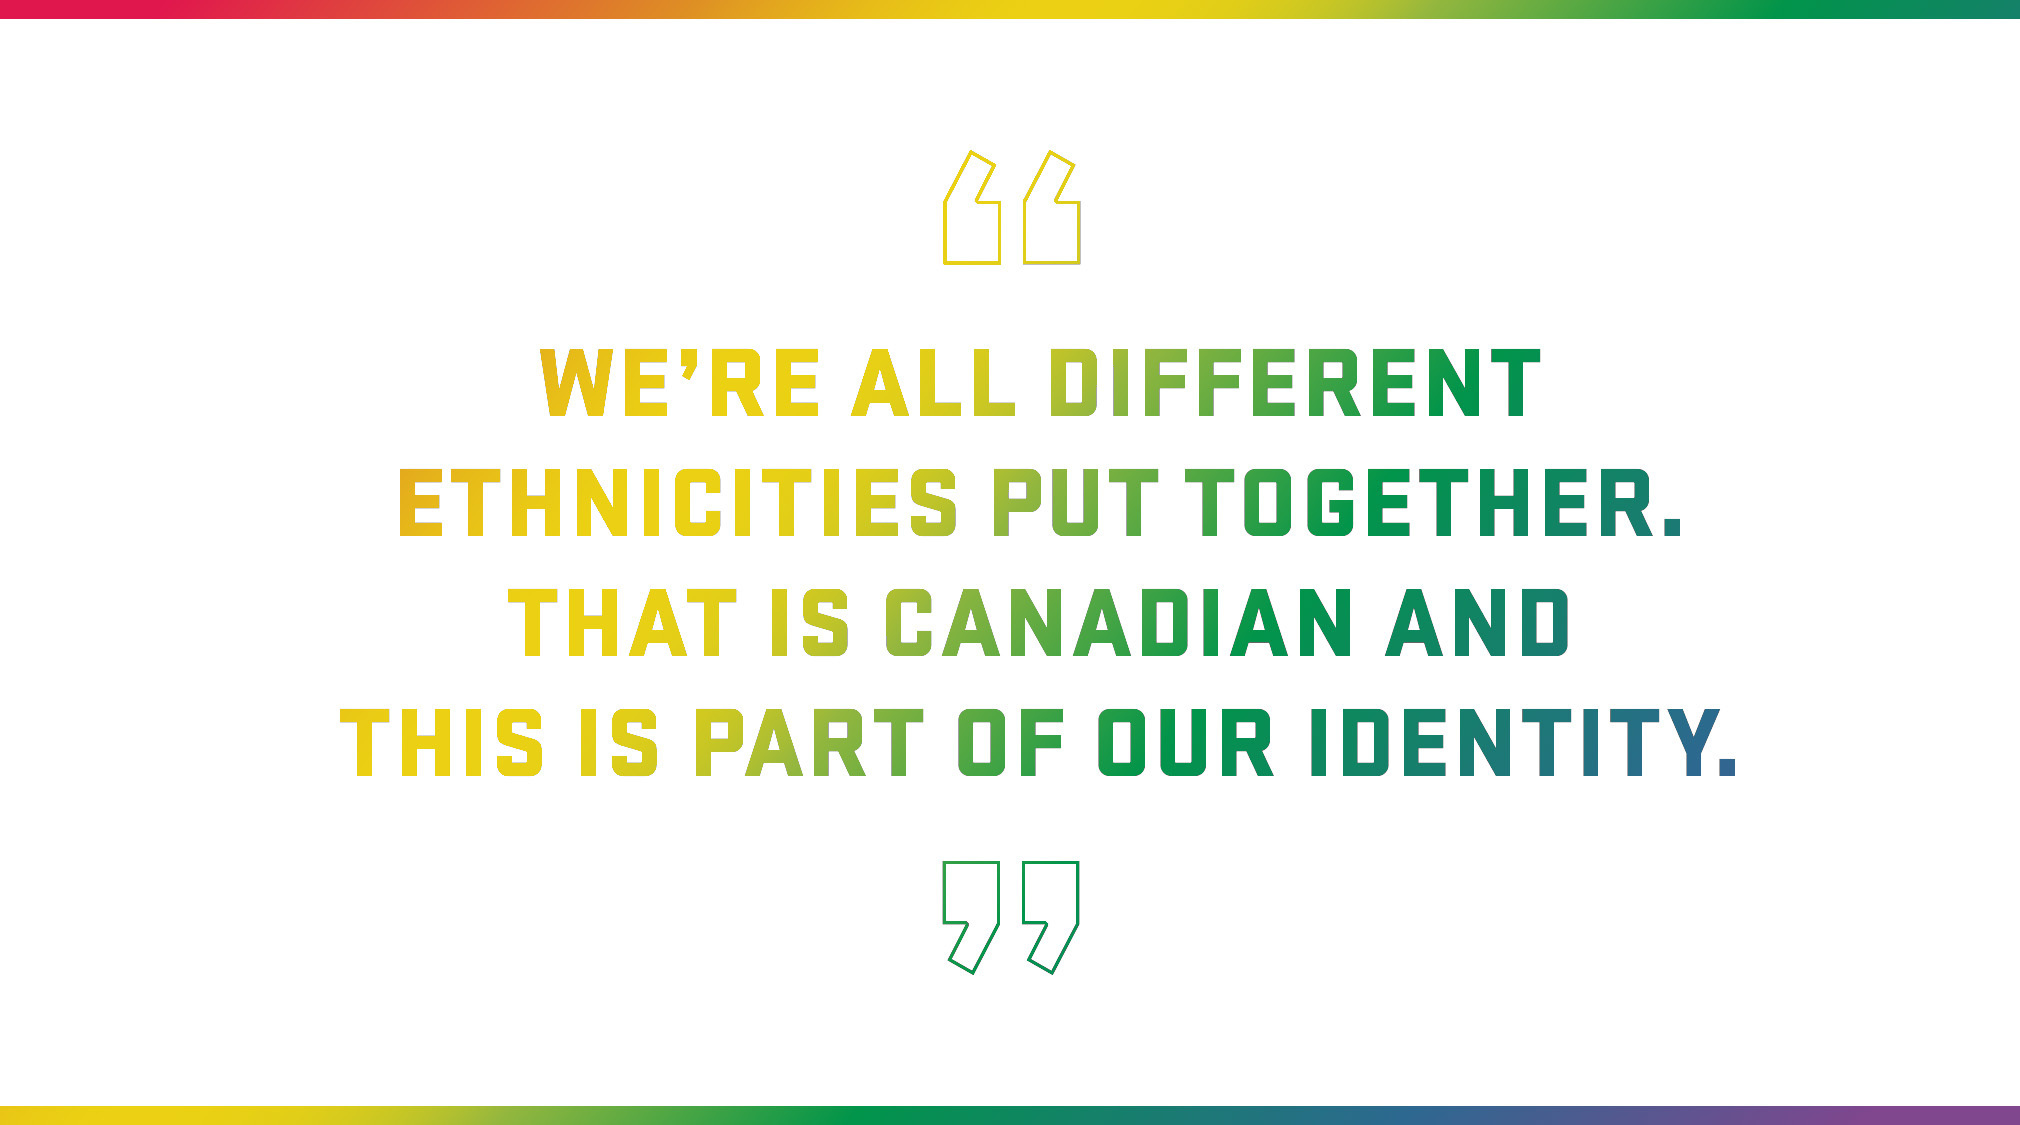 Block Quote: We’re all different ethnicities put together. That is Canadian and this is part of our identity. 